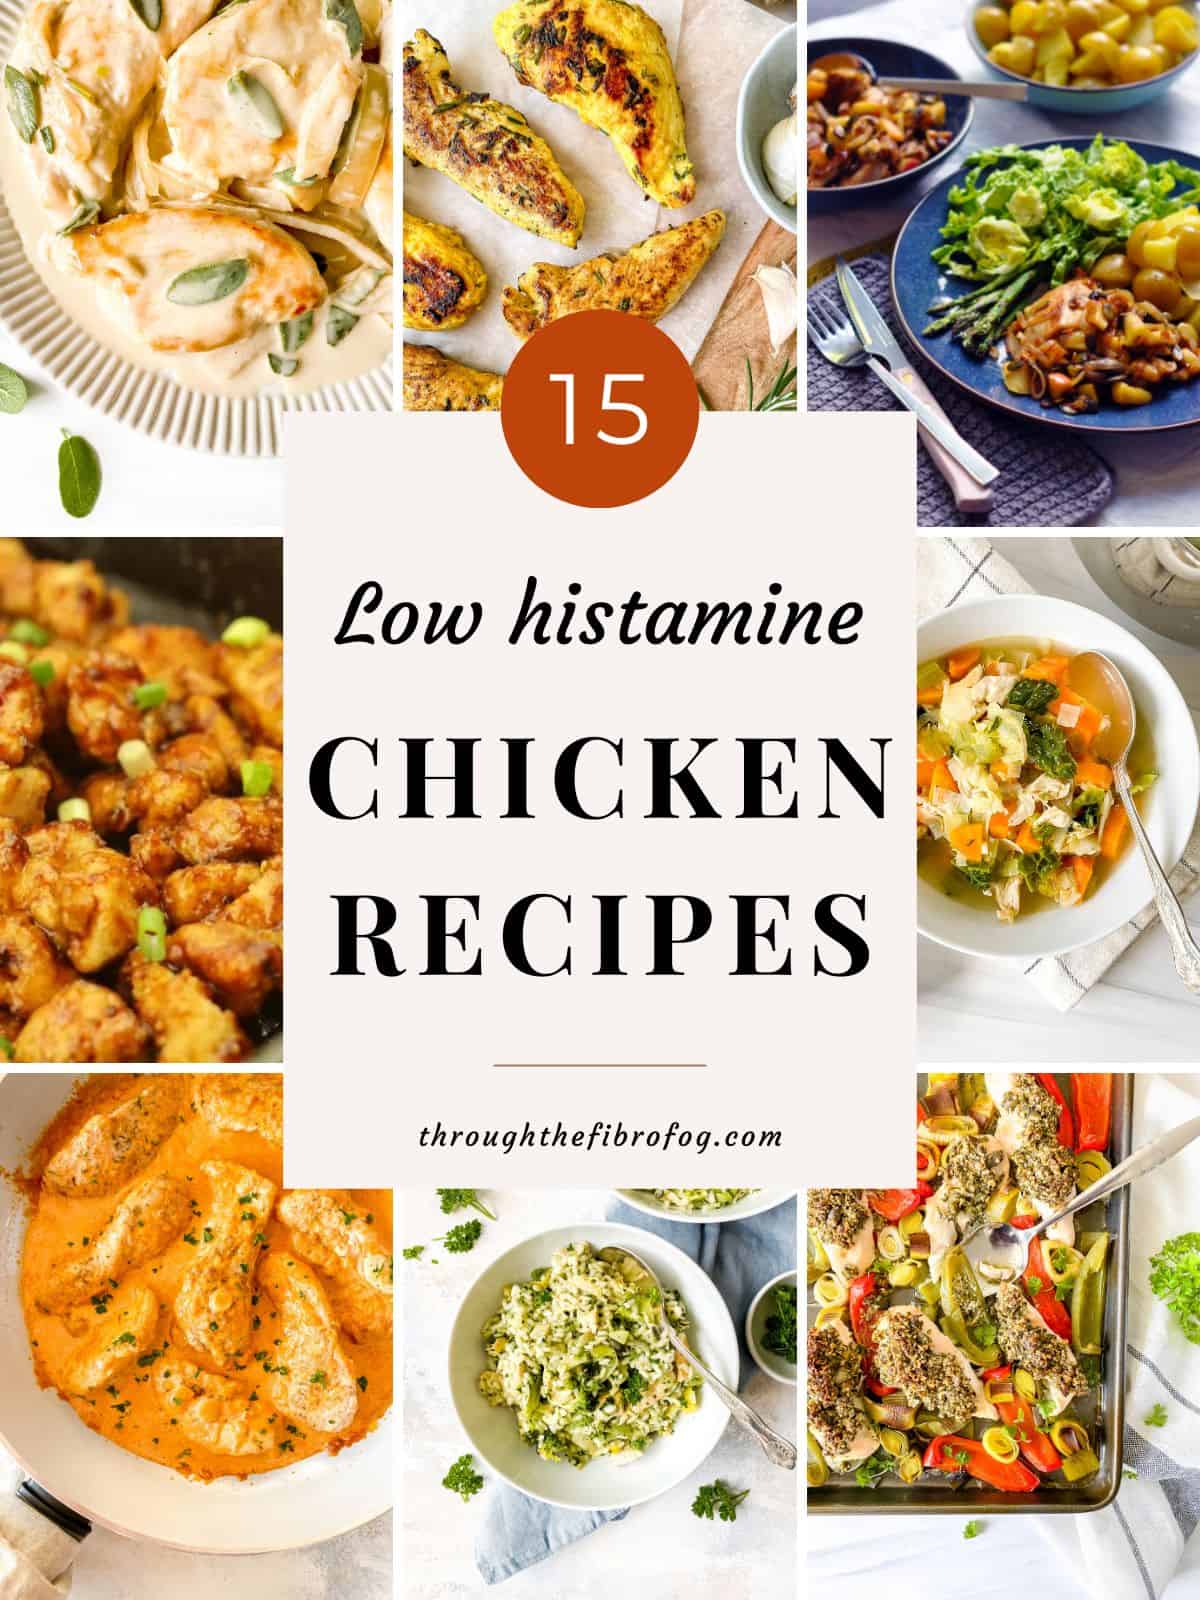 collage of chicken recipes with text saying 15 low histamine chicken recipes.